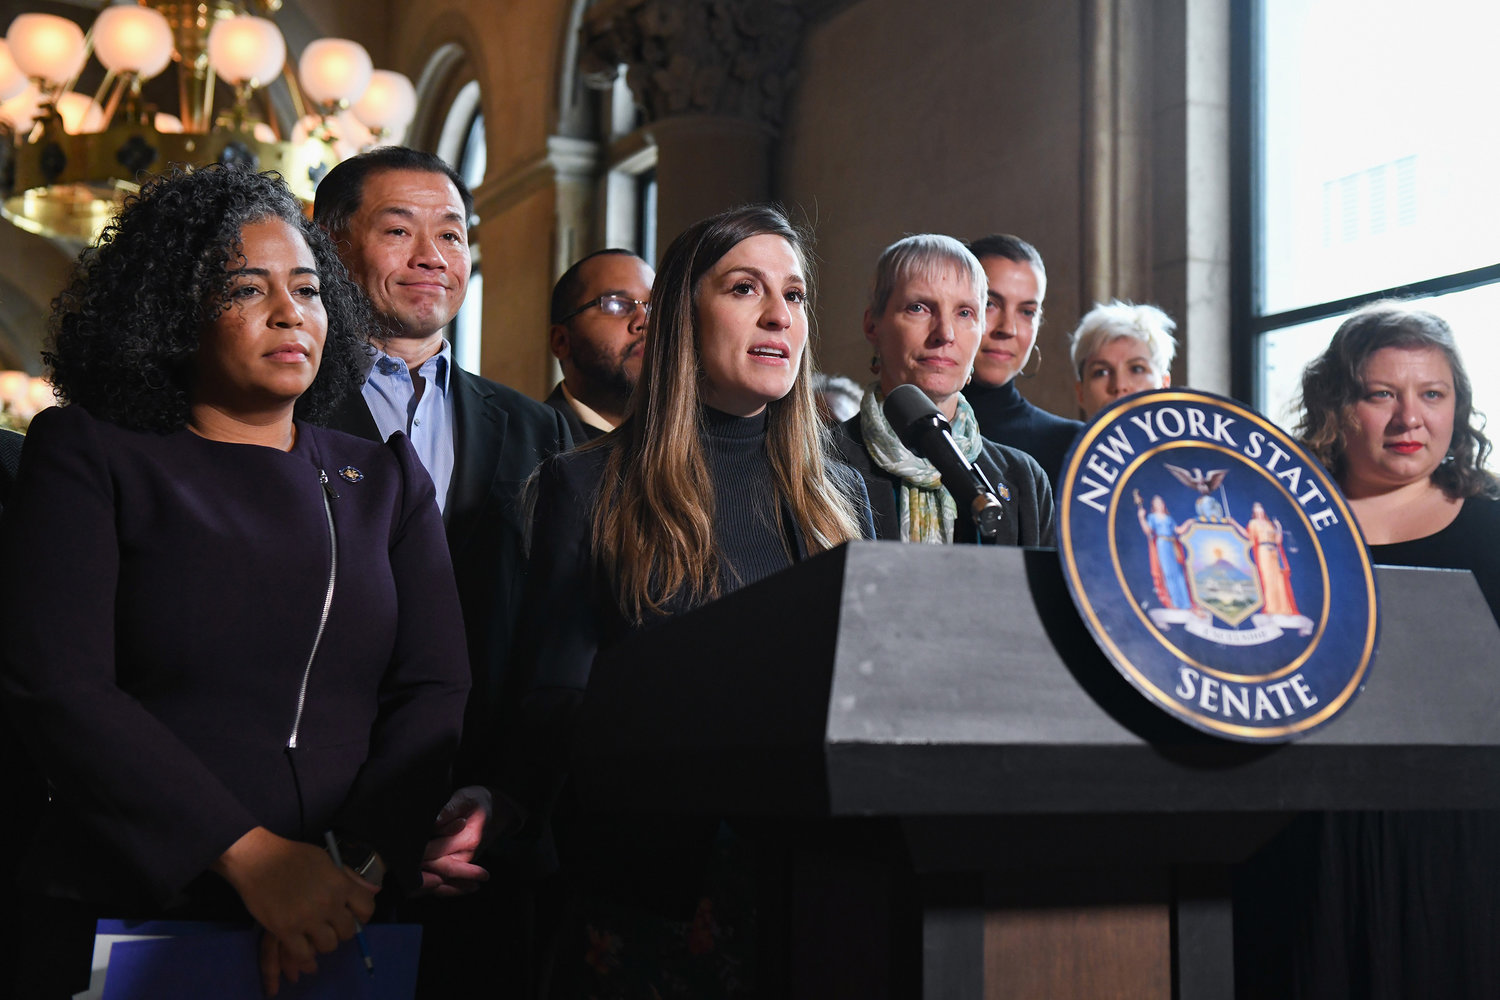 NY state Sen. Alessandra Biaggi, shown holding a press conference about an abortion access fund, Despite the high court decision nixing the new state and congressional district maps, she continues to campaign for the 3rd congressional district.